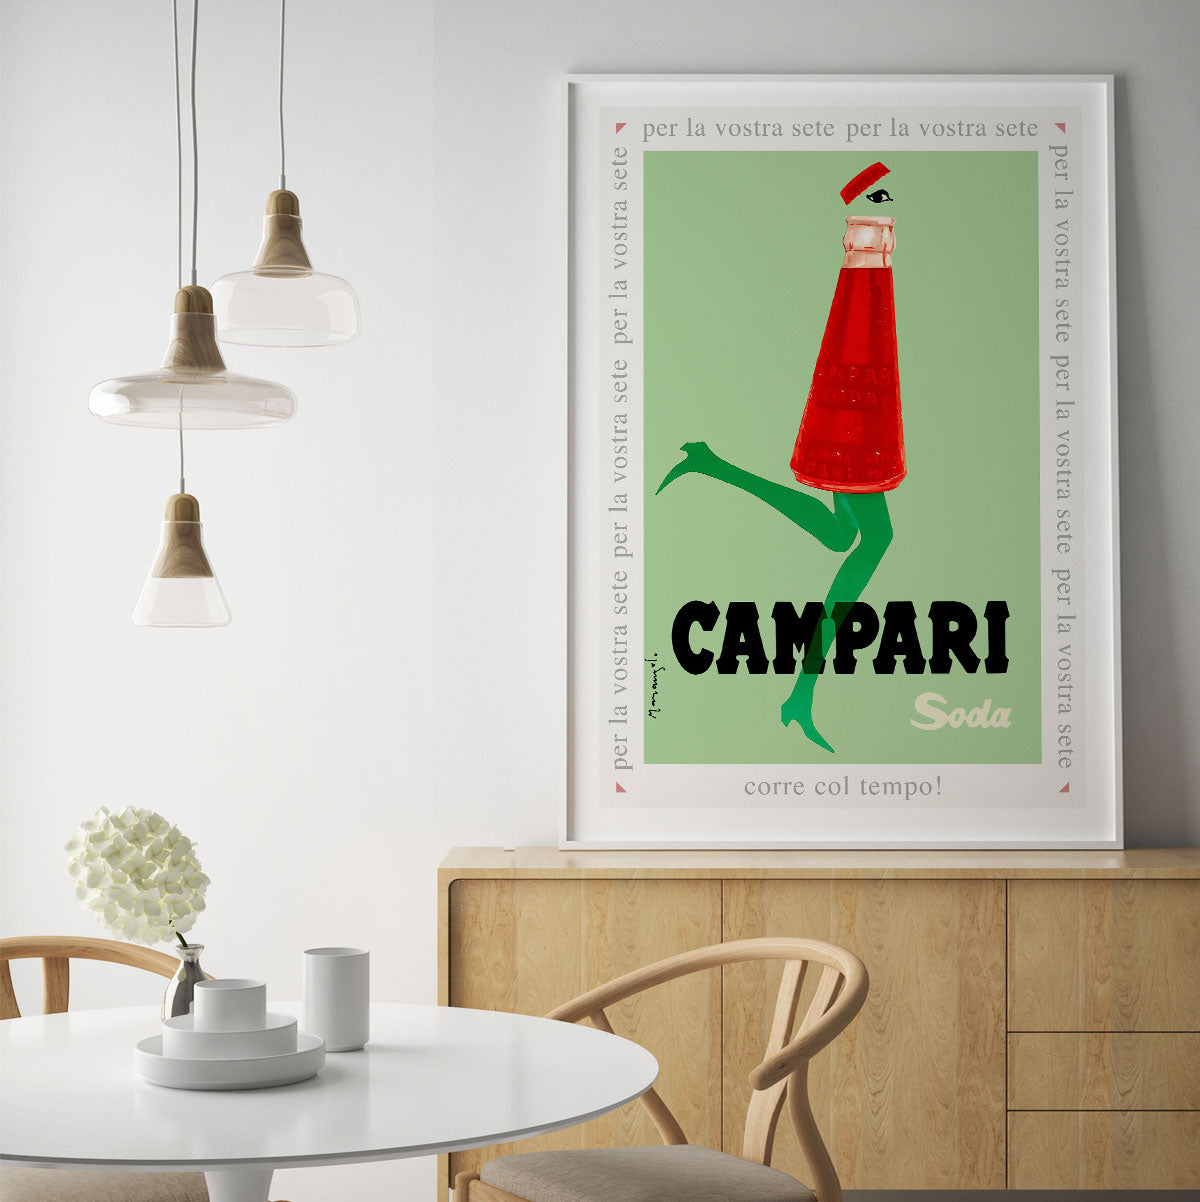 Campari Soda vintage retro advertising poster from Places We Luv